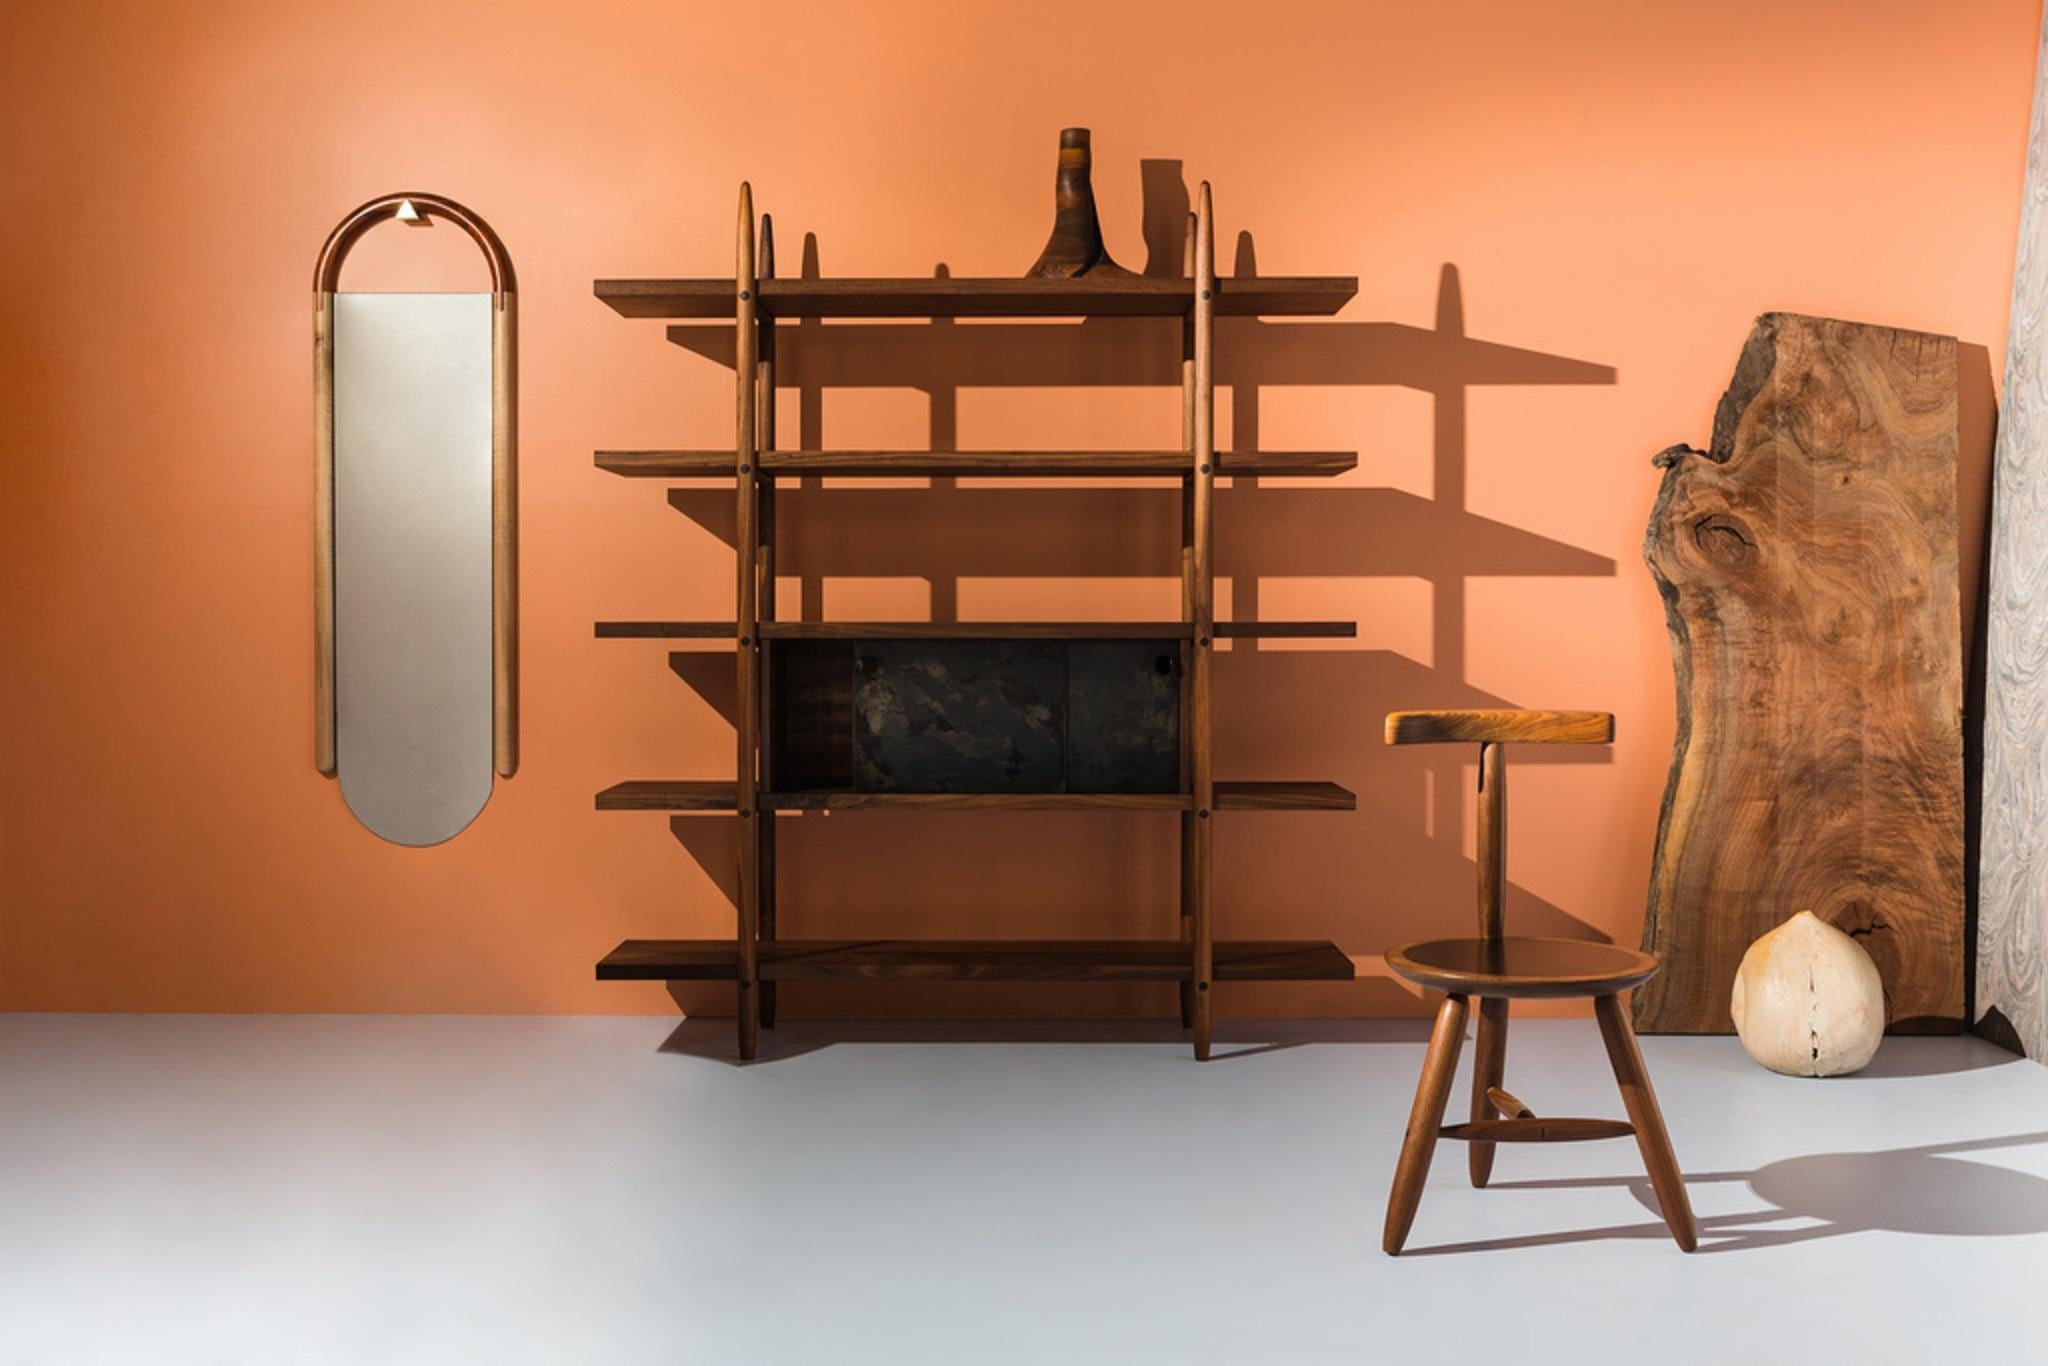 This handmade bookshelf is made of wood by Birnam Wood Studio in New York. This contemporary shelving design is heavily influence by traditional mid-century modern silhouettes. The box cupboard on the second shelf has sliding drawers that open and